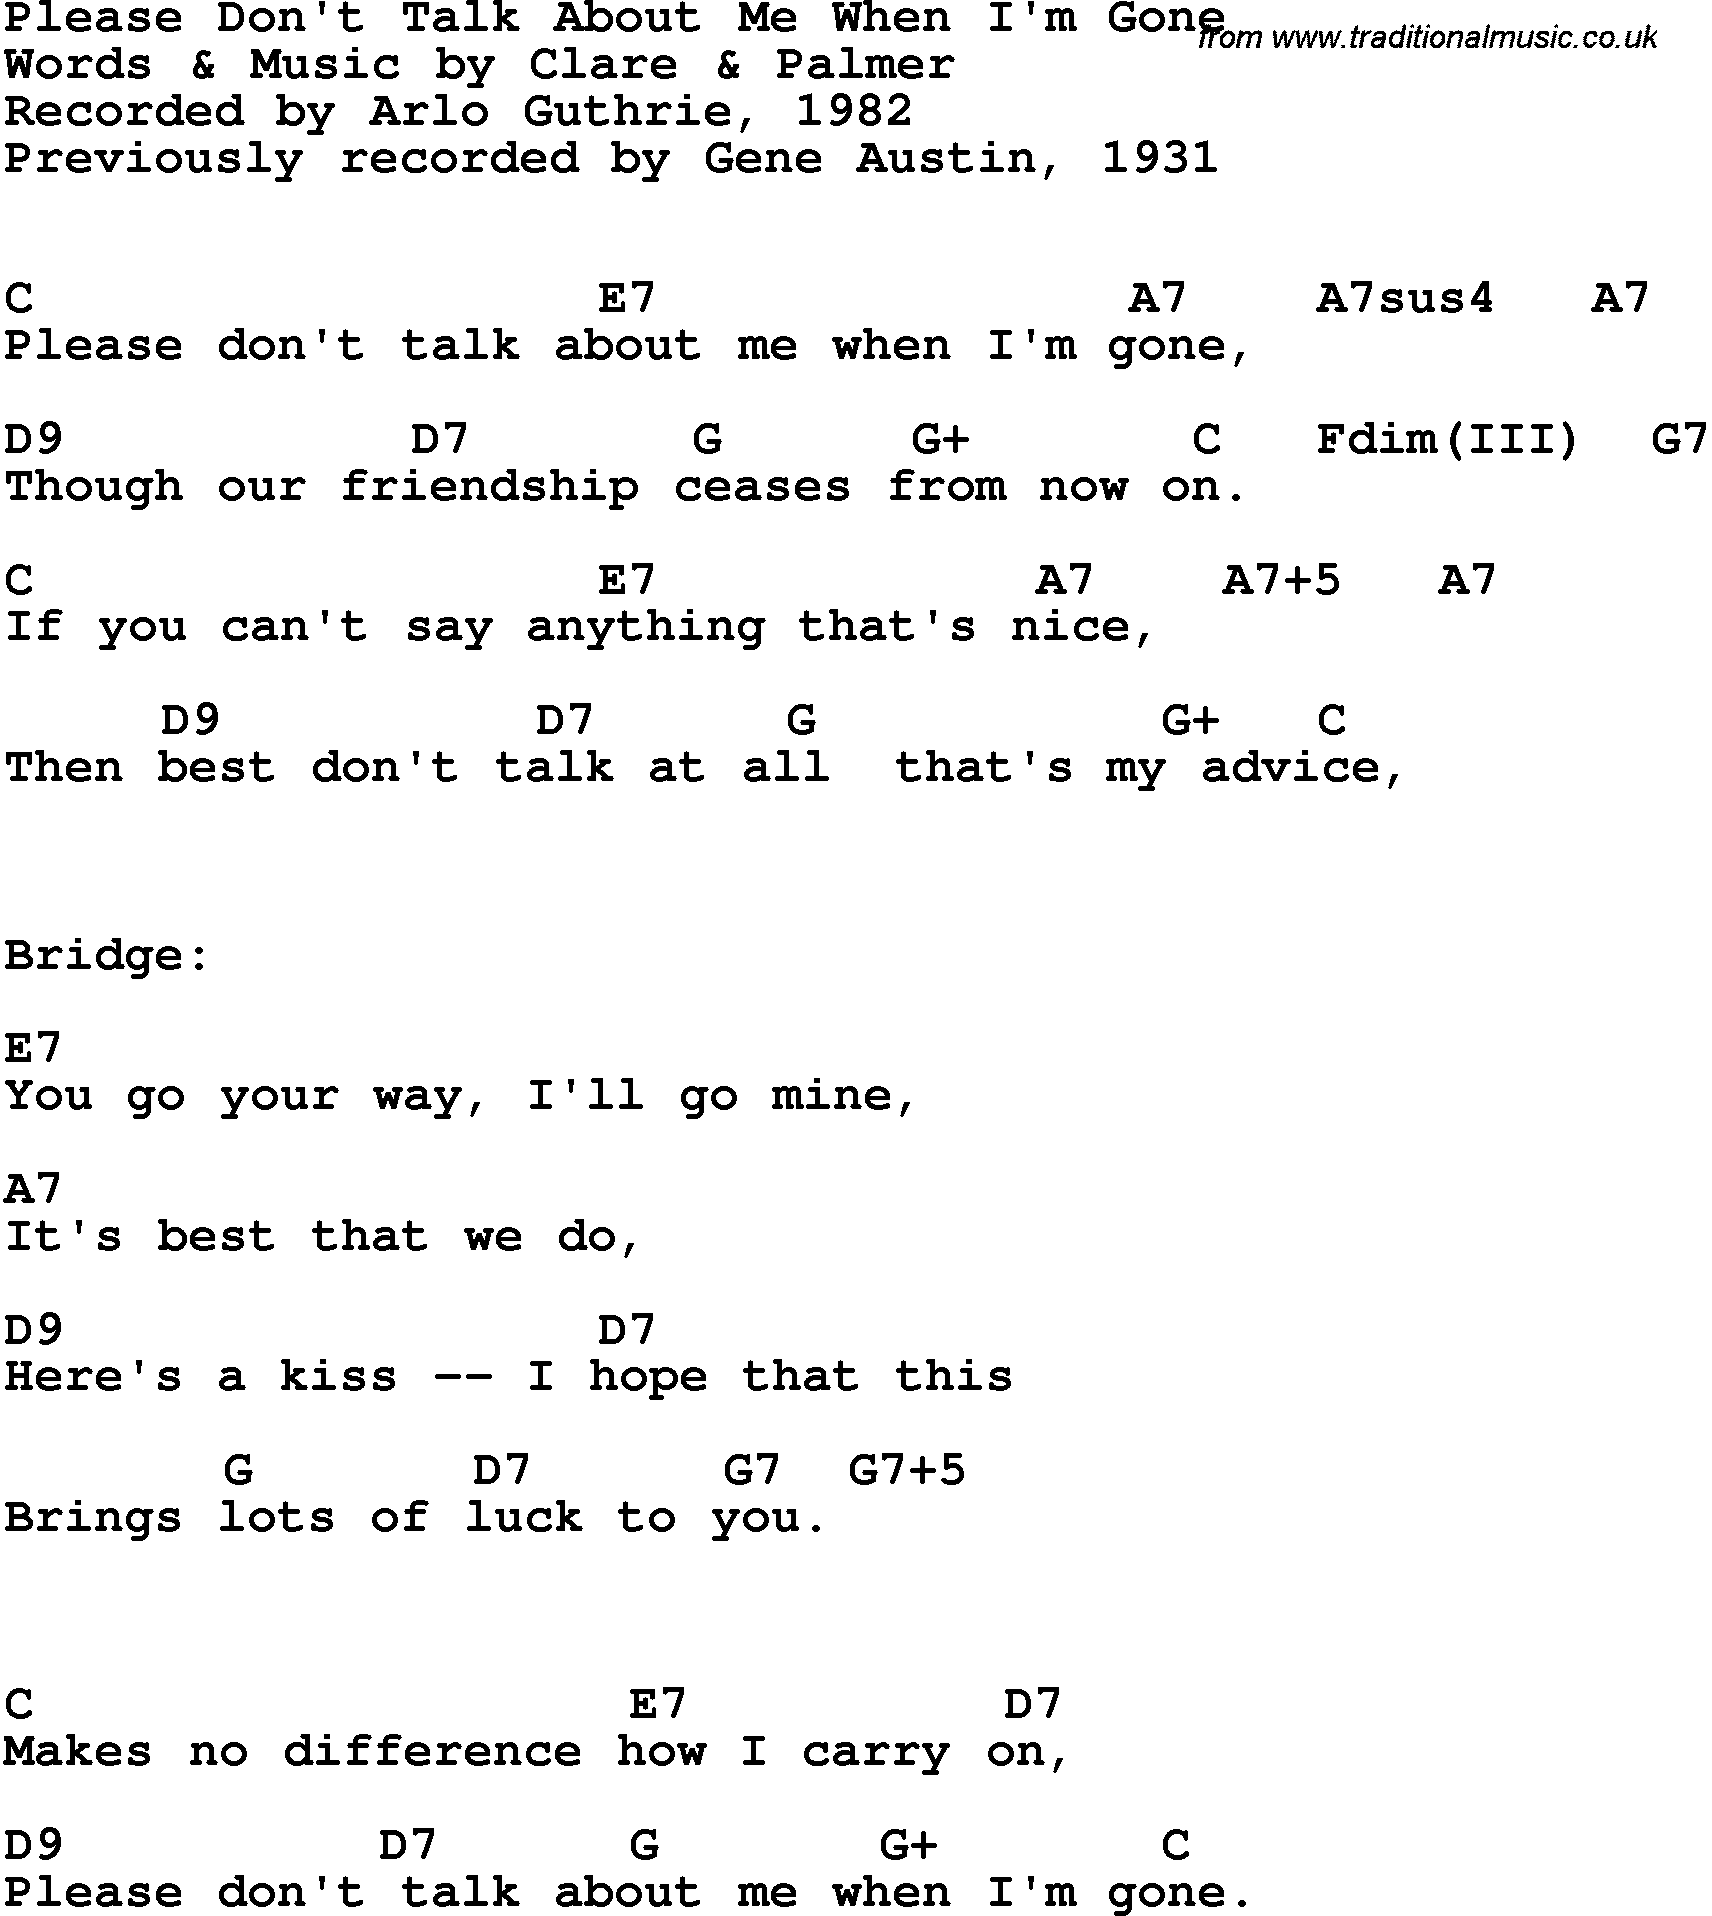 Song Lyrics with guitar chords for Please Don't Talk About Me When I'm Gone - Arlo Guthrie, 1982